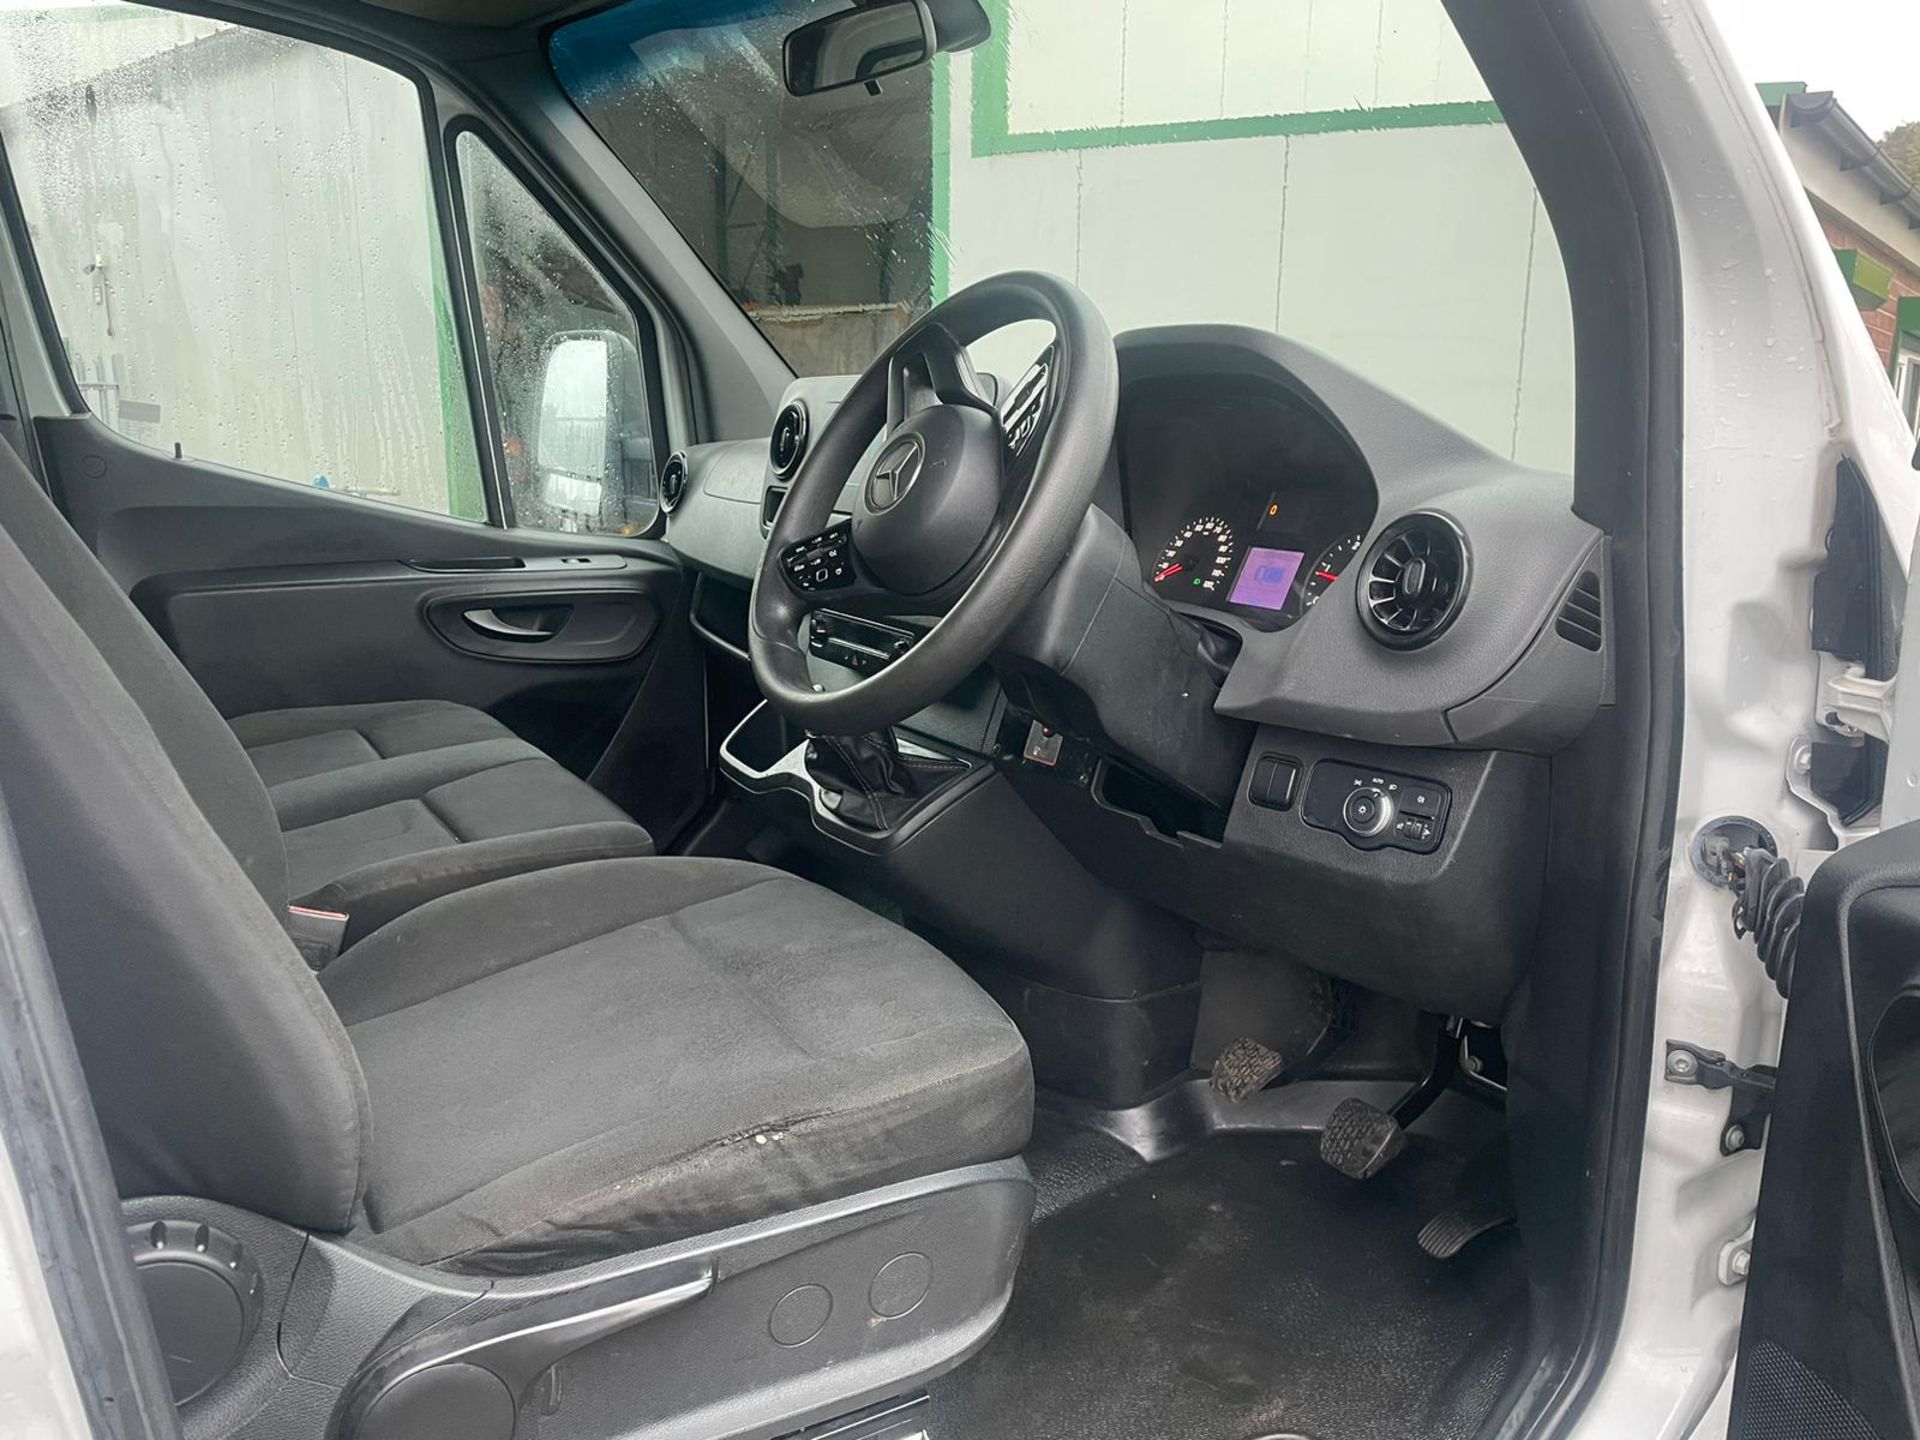 2018 MERCEDES SPRINTER 314 CDTI LUTON WITH TAIL LIFT - 108,356 WARRANTED MILES - 2.2 EURO 6 ENGINE  - Image 6 of 10